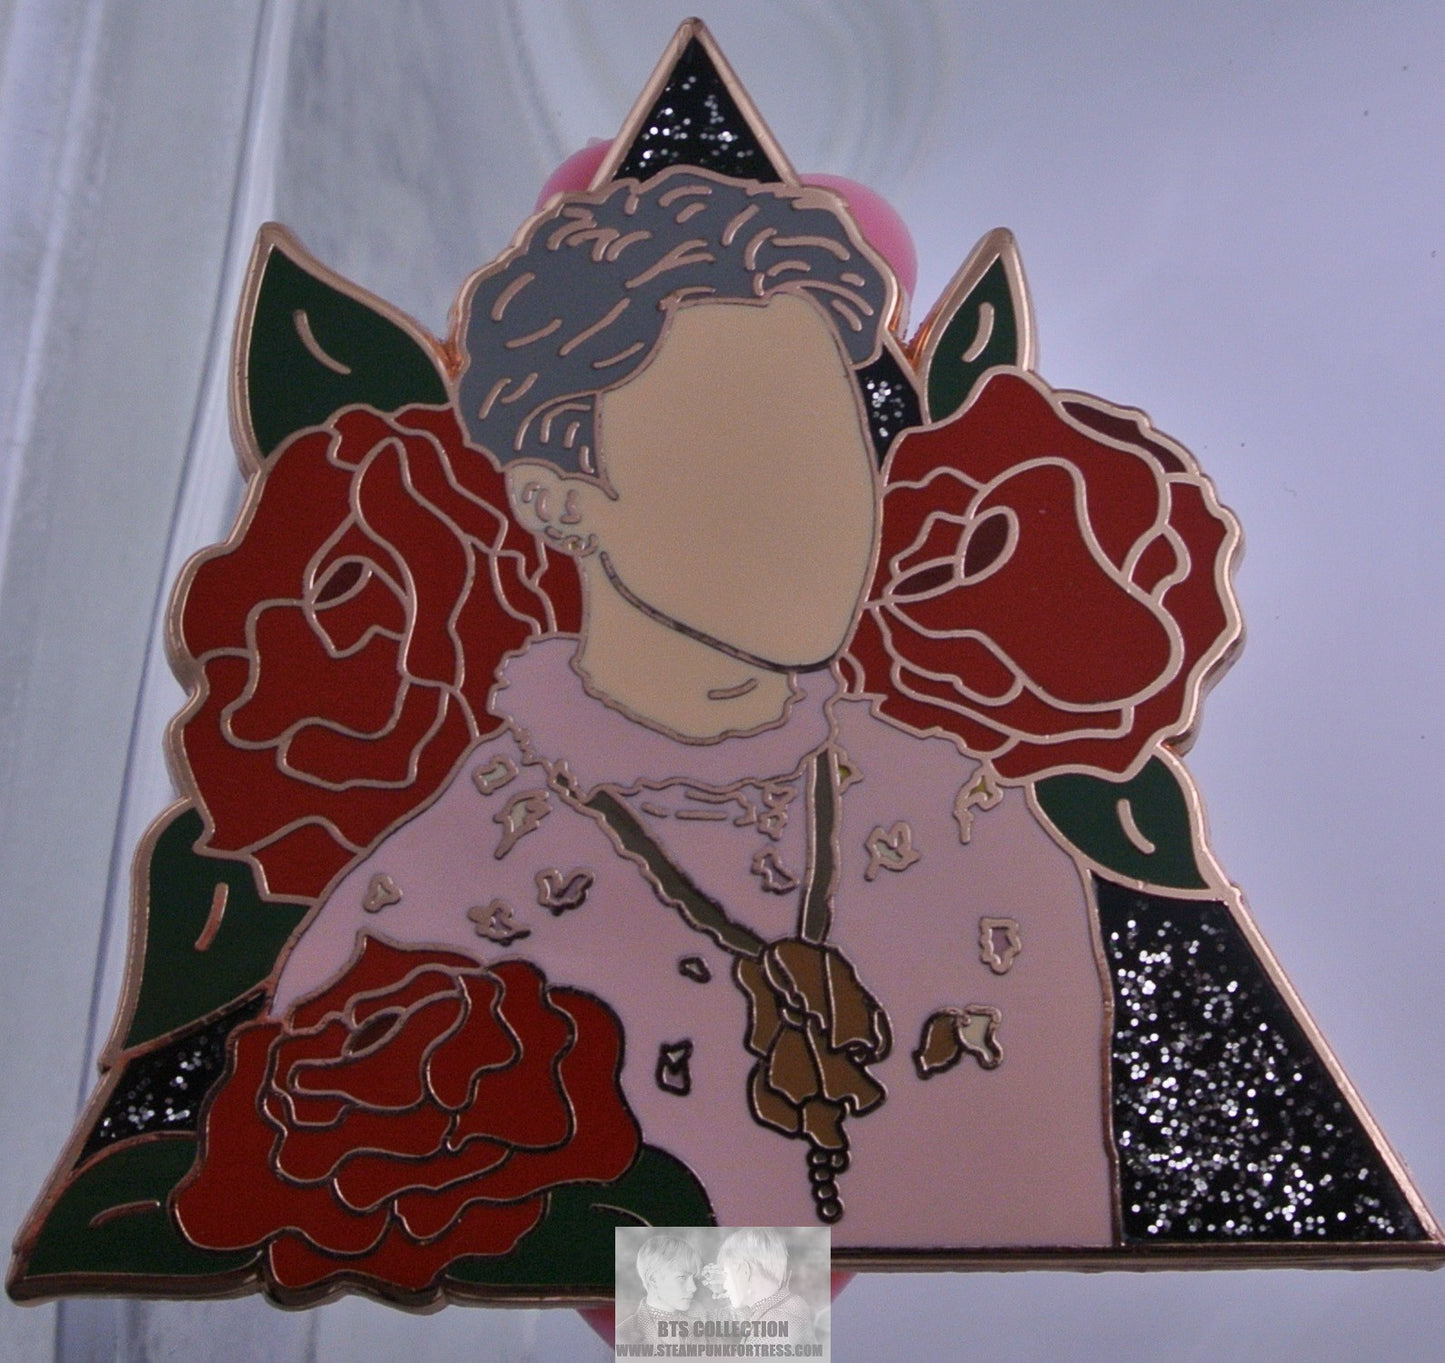 BTS ENAMEL PIN BADGE ROSE GOLD COPPER PARK JIMIN SILVER HAIR PINK SHIRT RED FLOWERS BUTTON